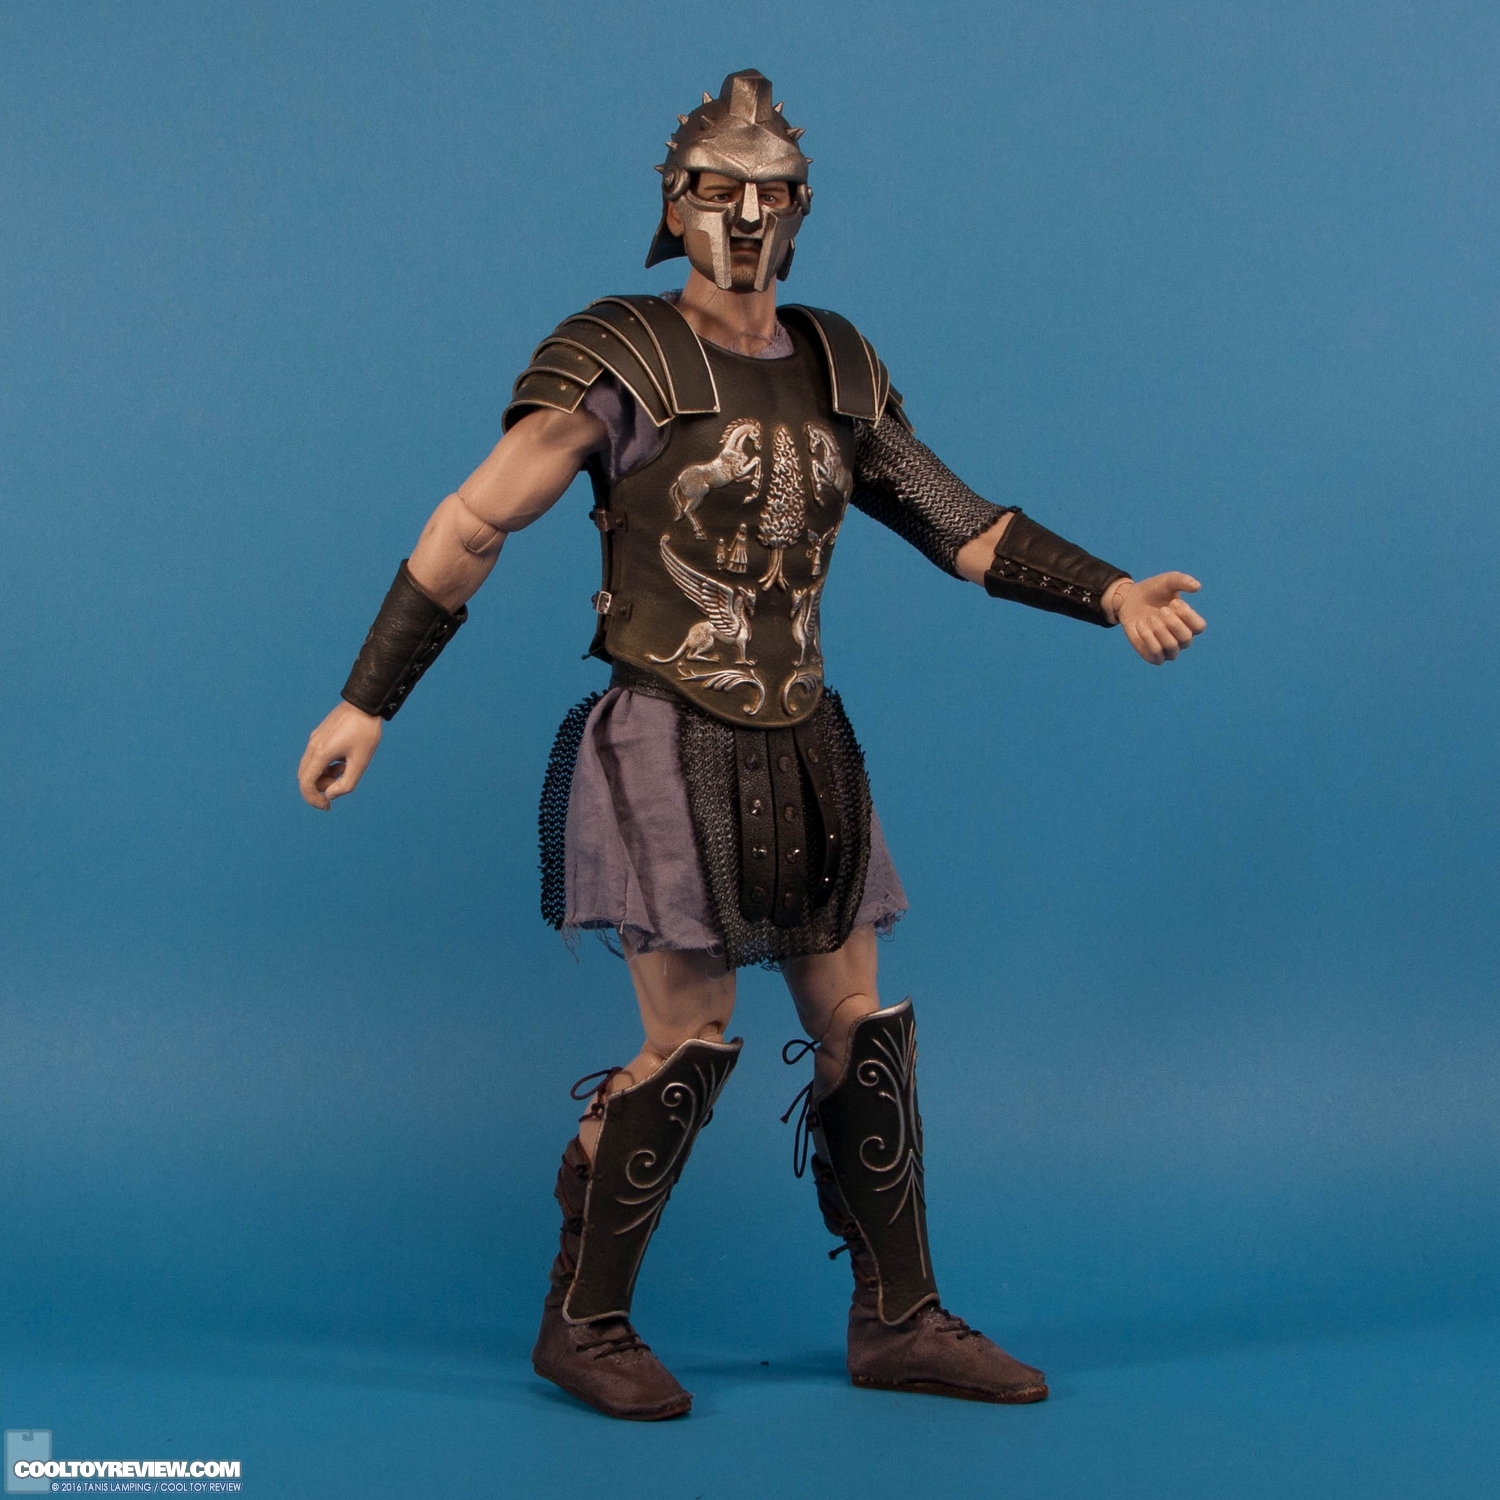 pangaea-toy-gladiator-general-sixth-scale-collectible-figure-010.jpg